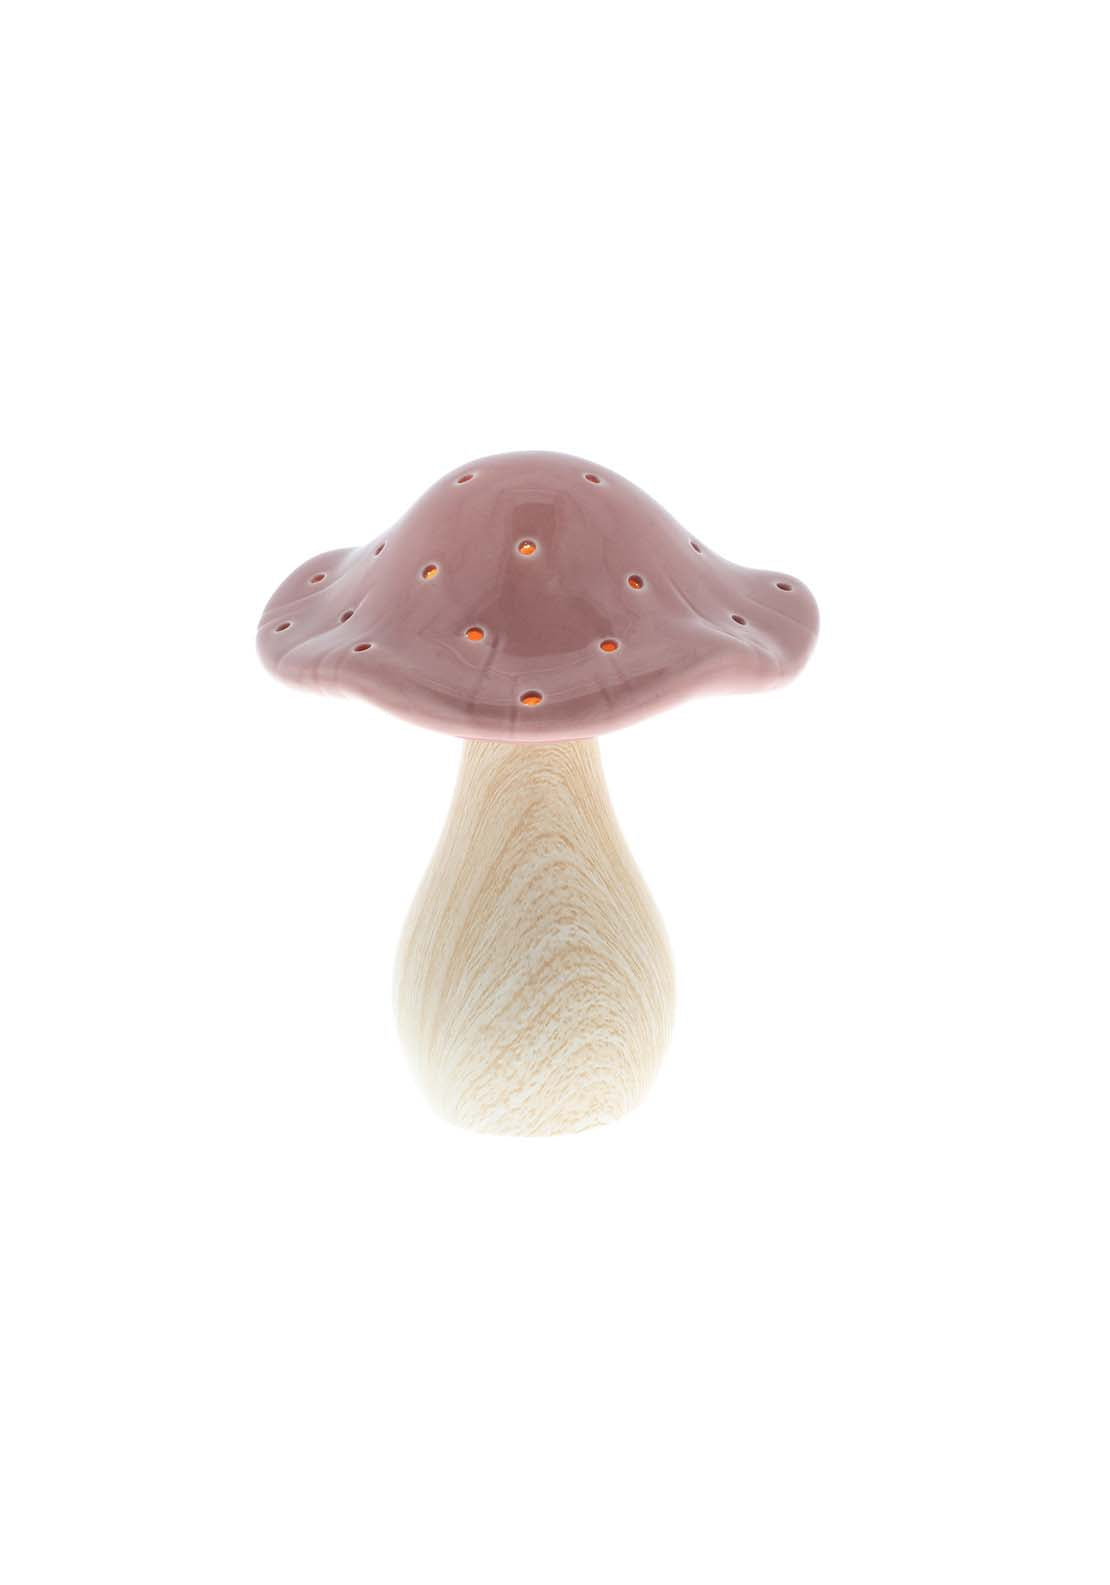 The Home Collection Mushroom Glow Lamp Large Pink - Pink 1 Shaws Department Stores